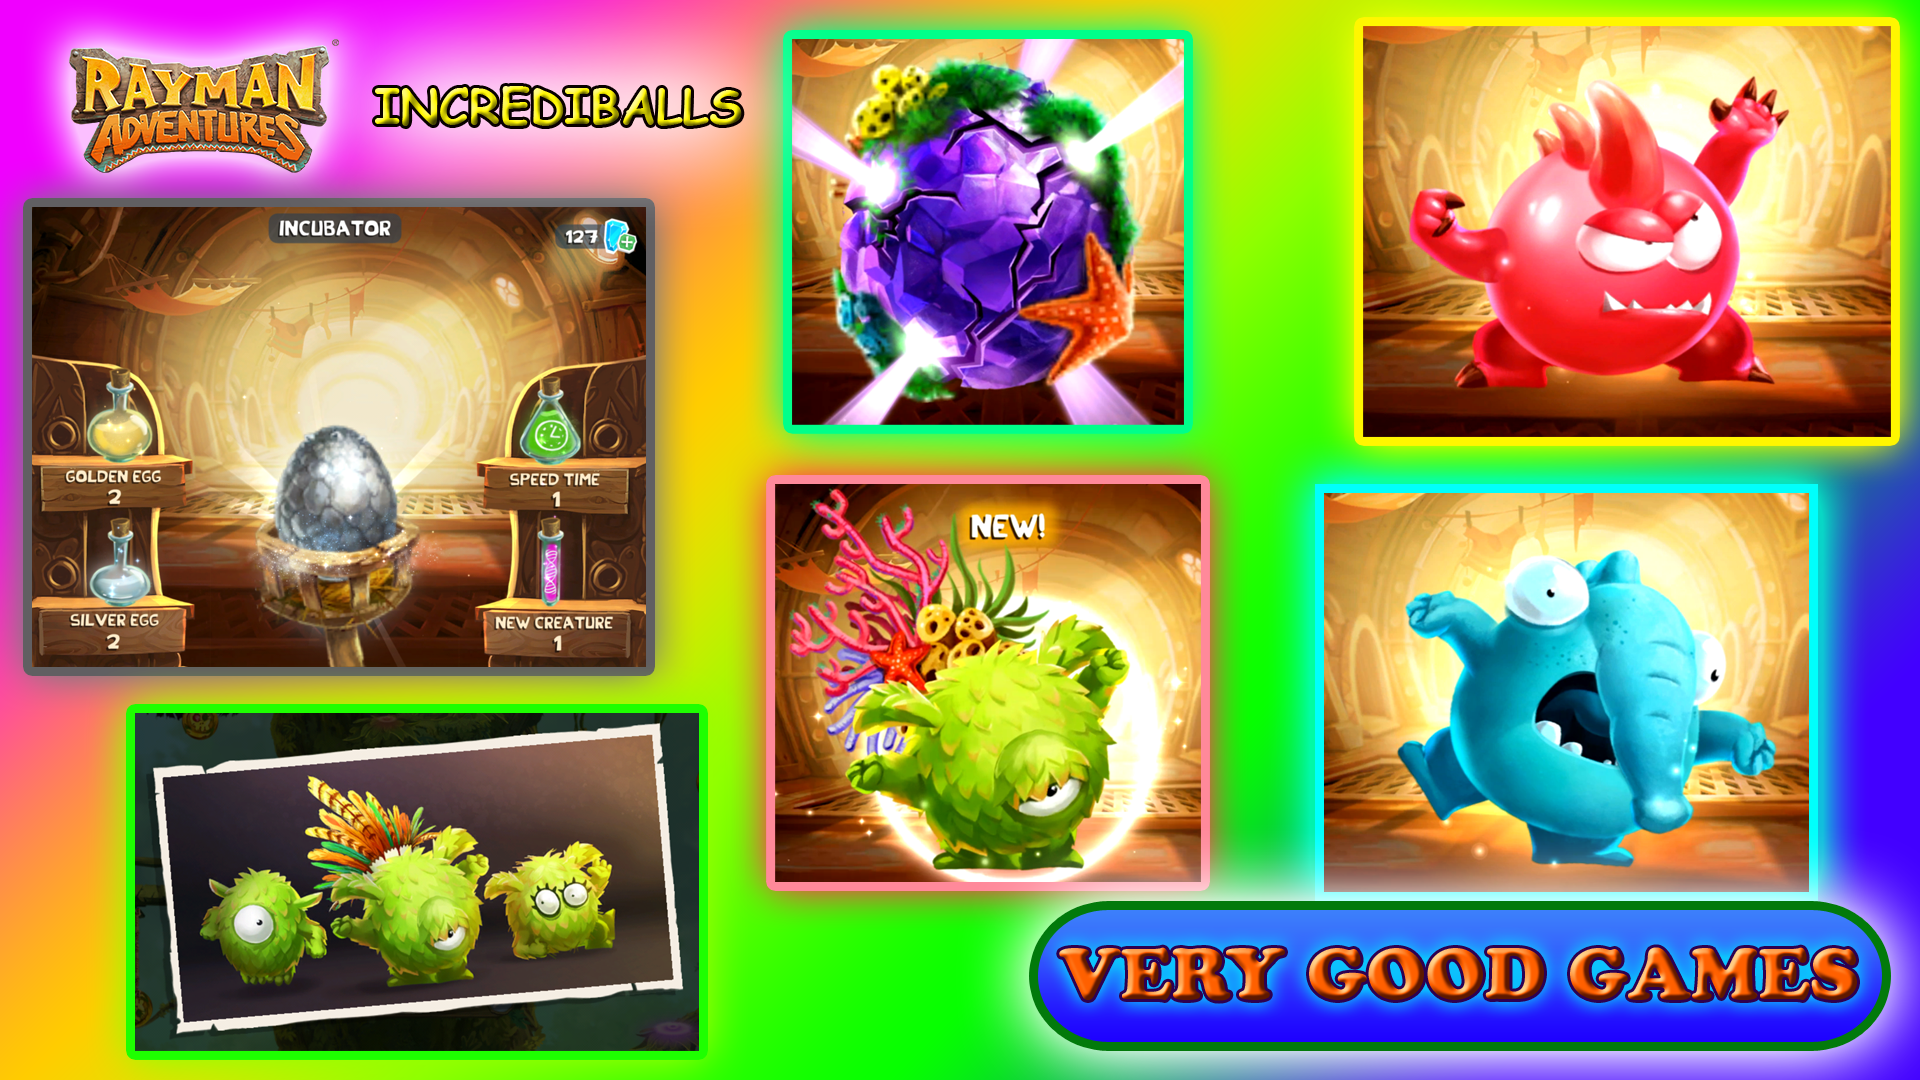 Screenshots from Rayman Adventures with incrediballs.